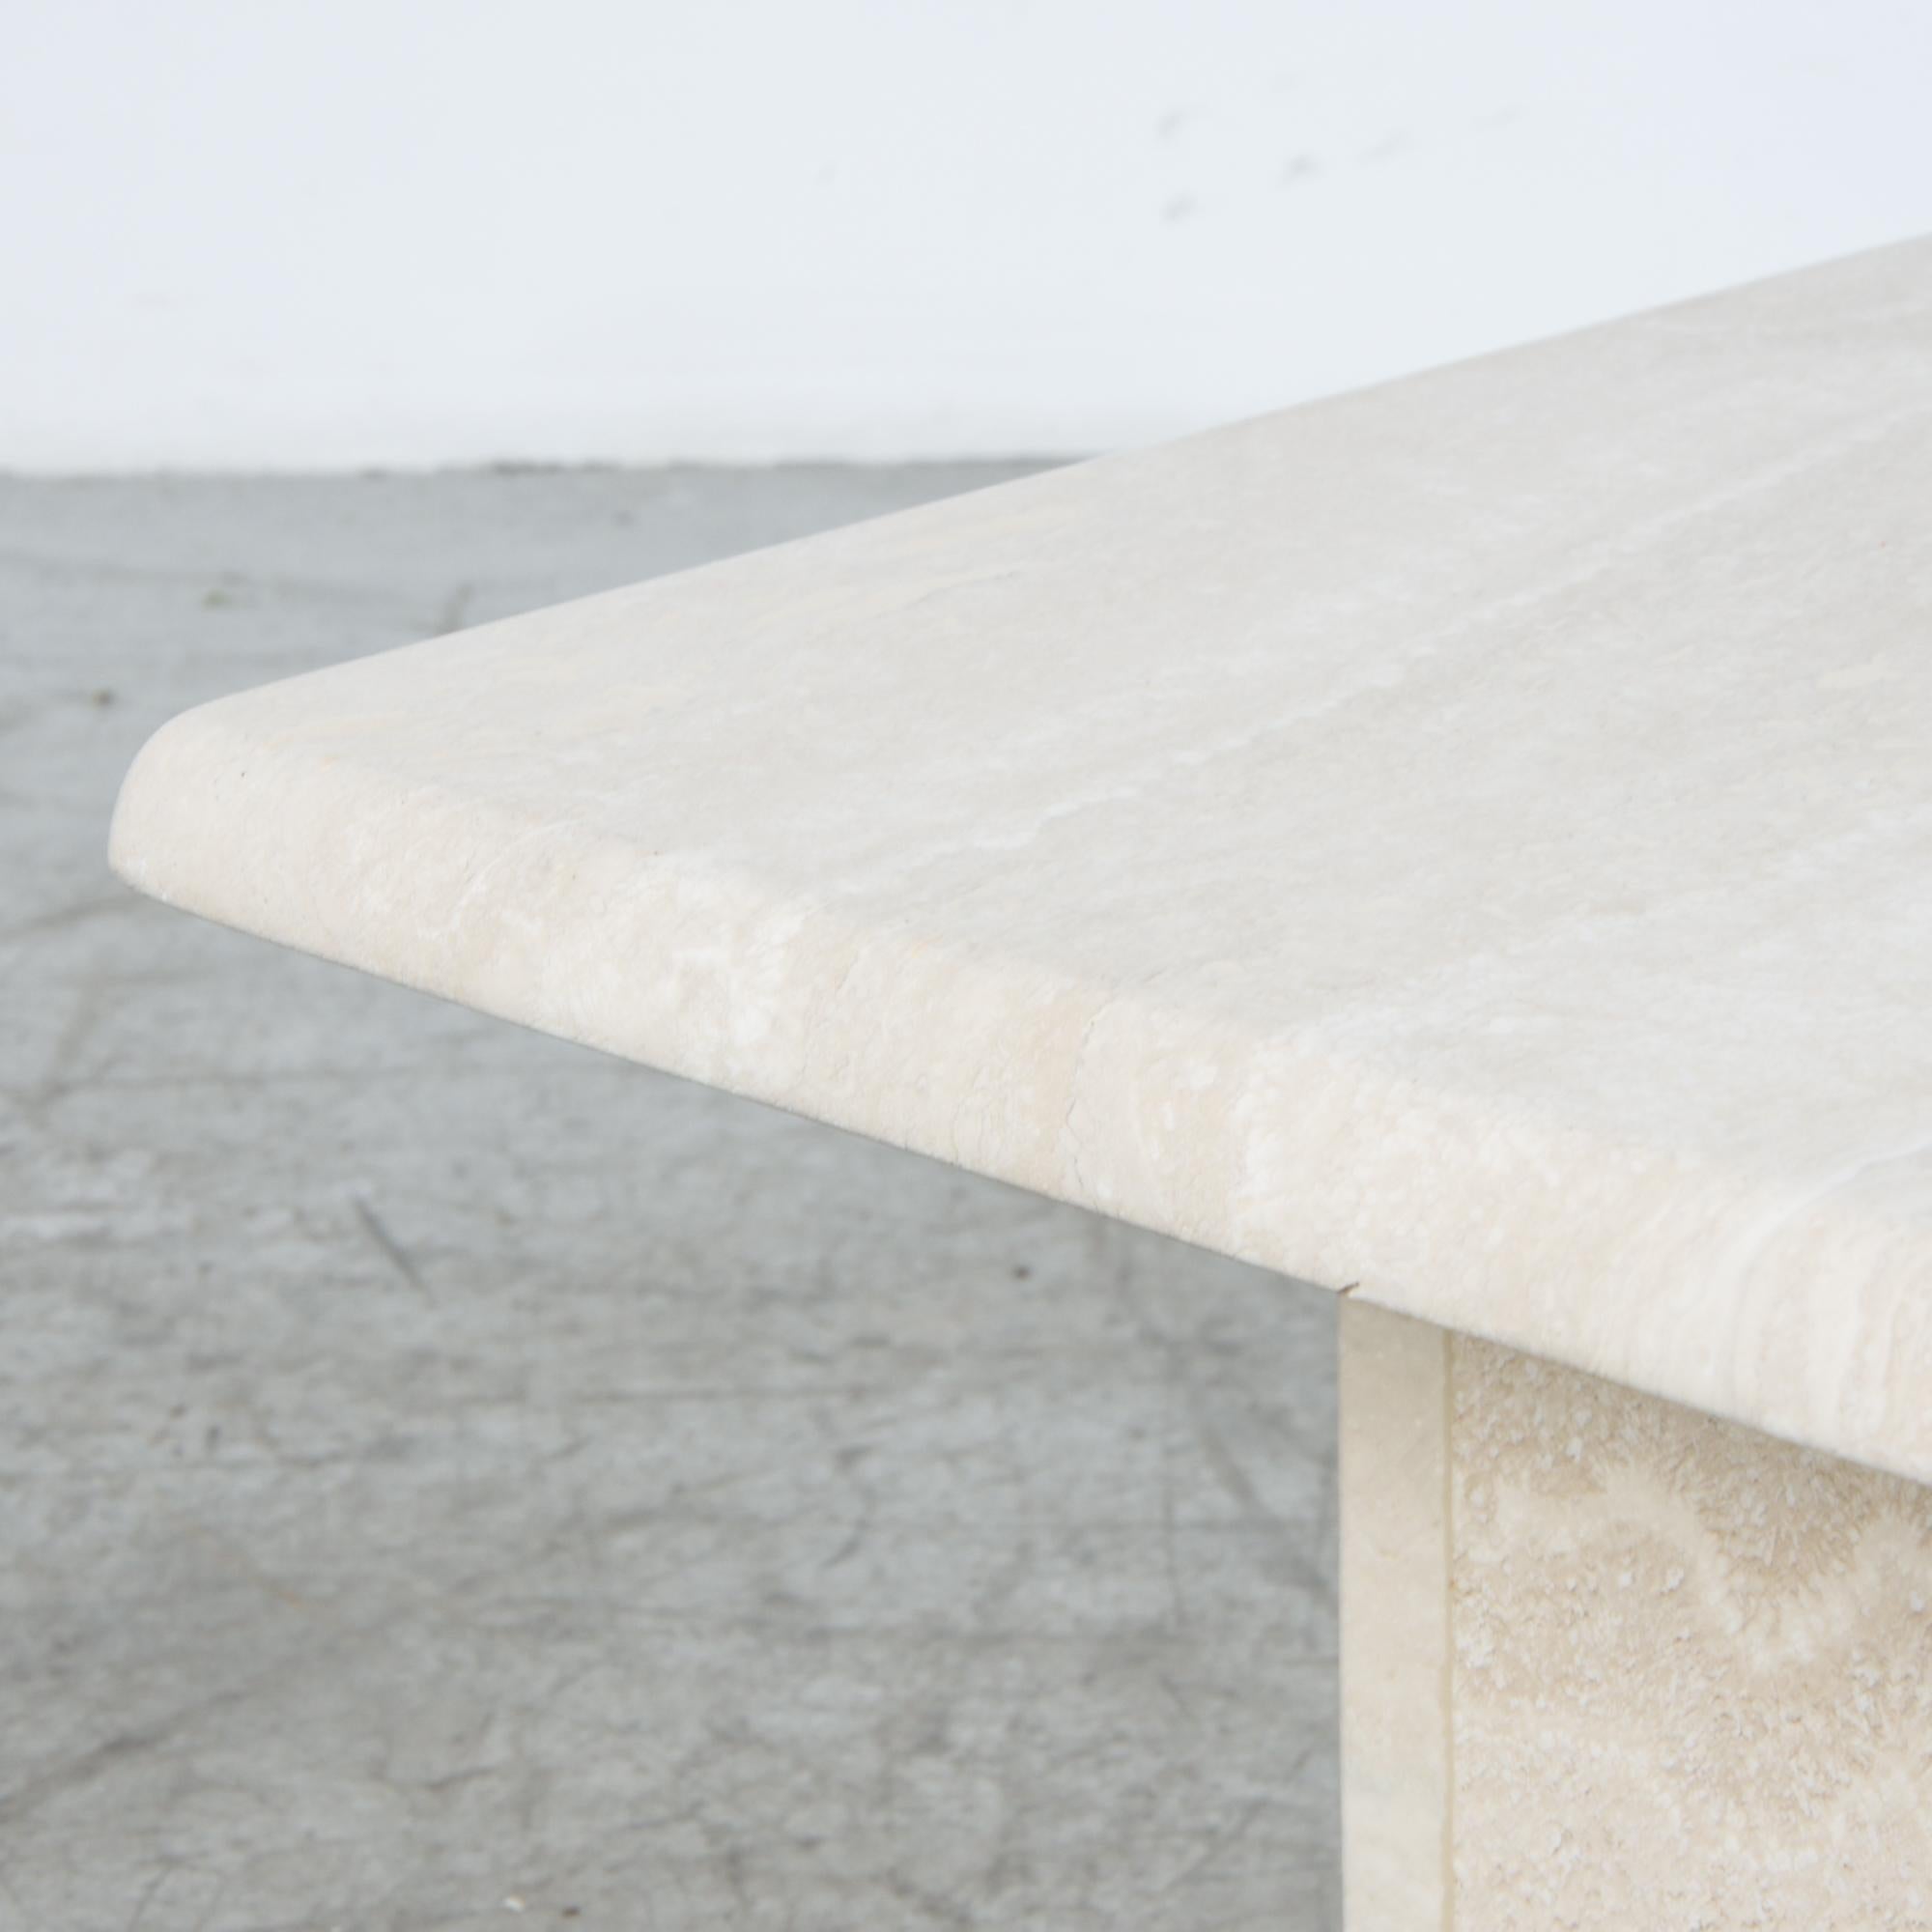 A refined travertine coffee table or pedestal, with rounded square top and base. A material rich in itself, echoing classical sculpture. Associations from antiquity to 1970s kitsch, this is a piece that truly fits in any space. At a modestly scaled